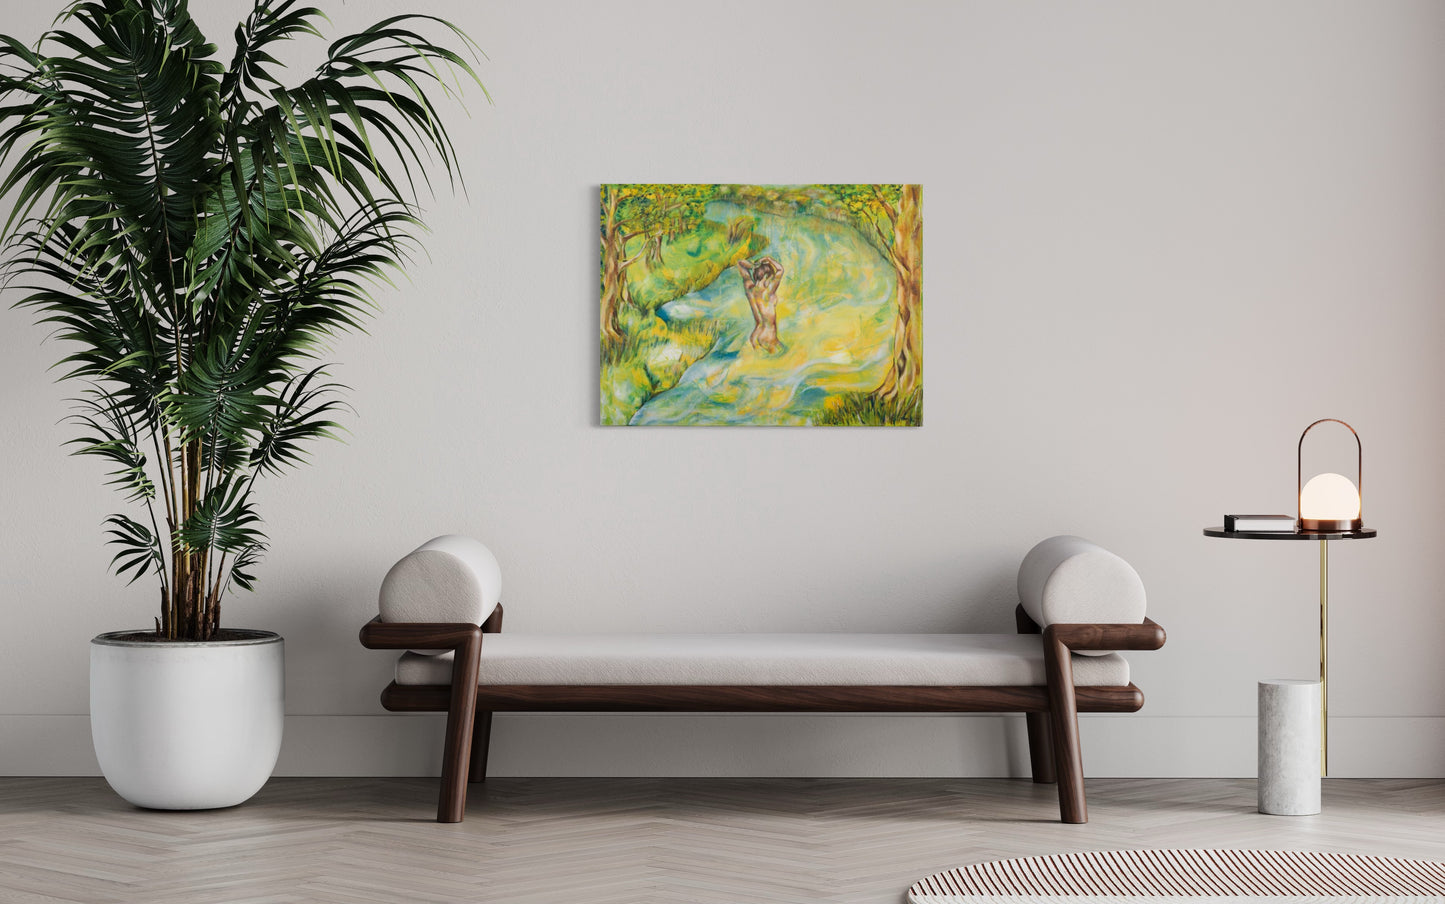 Bath, Oil Painting on canva, for a fresh, sensual and natural feeling in your space